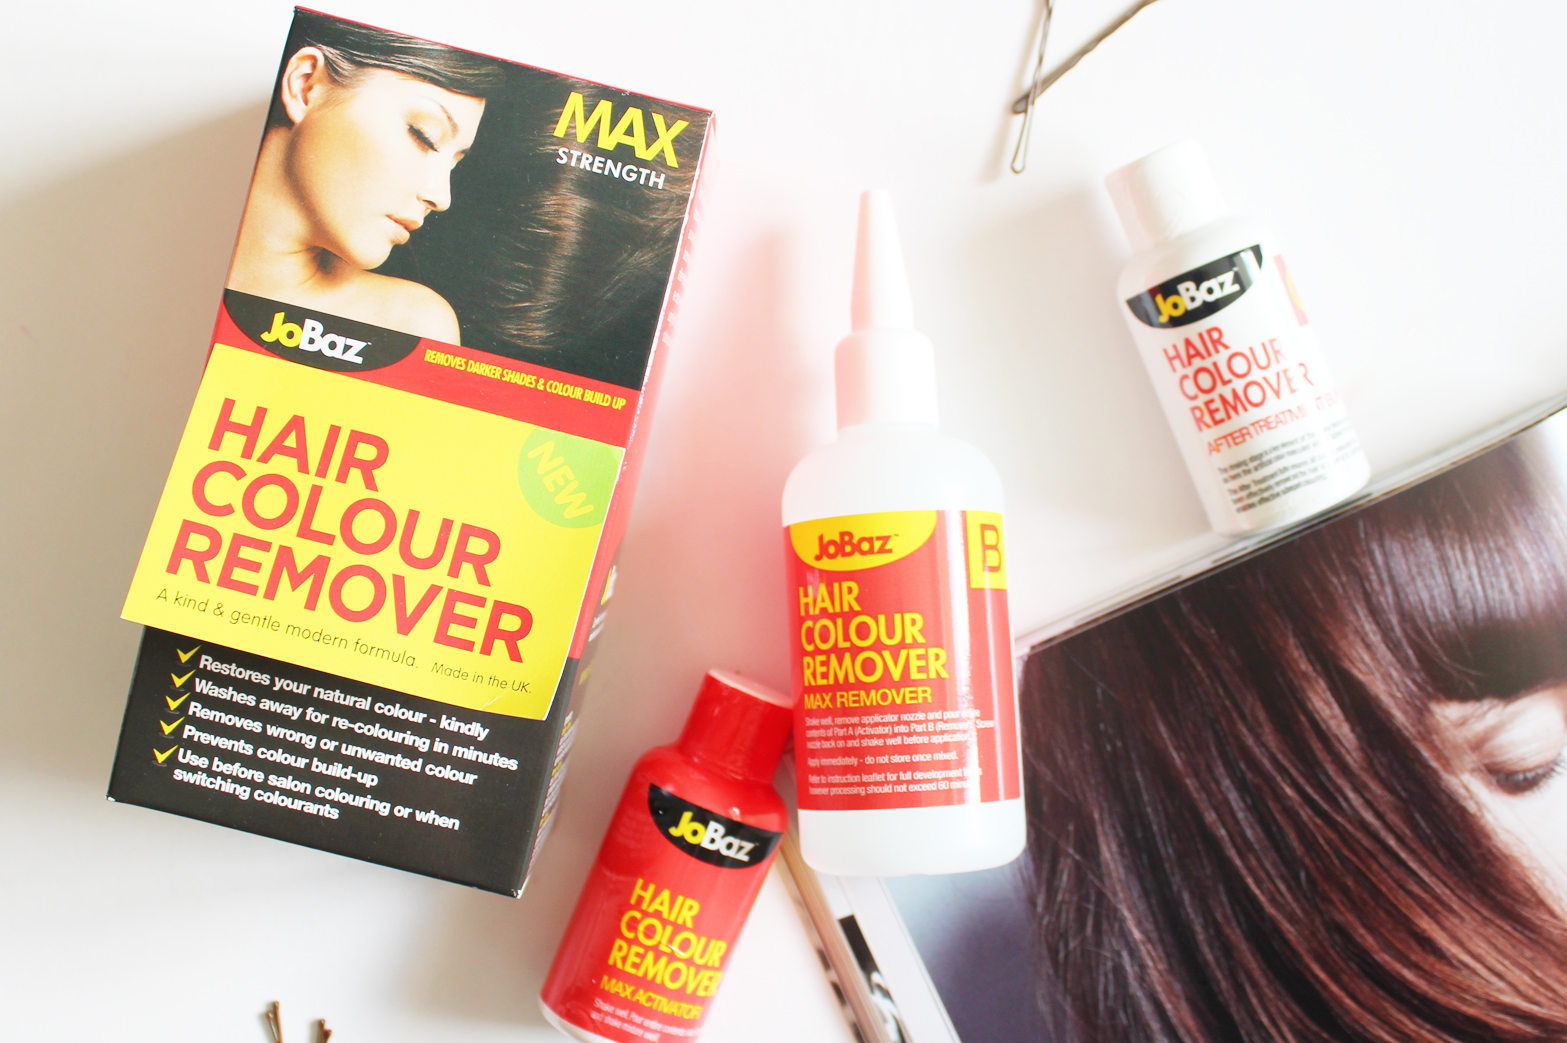 JOBAZ | Max Strength Hair Colour Remover - Review, Before + After - CassandraMyee